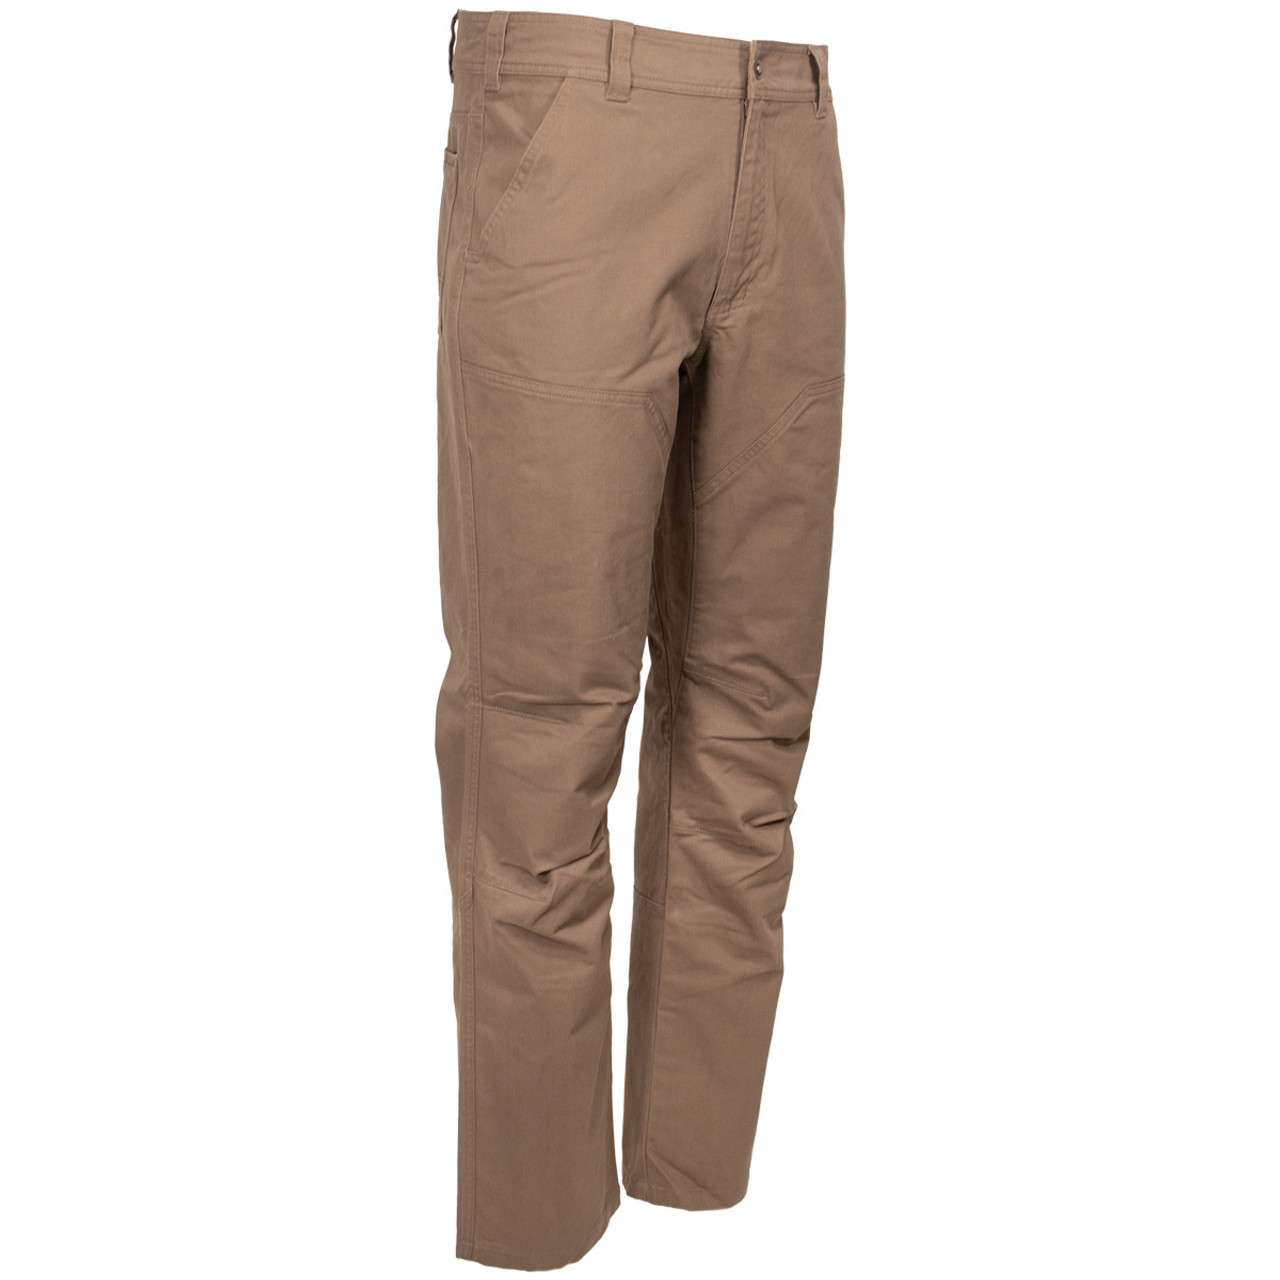 Rogers Upland Khaki Pant | Rogers Sporting Goods